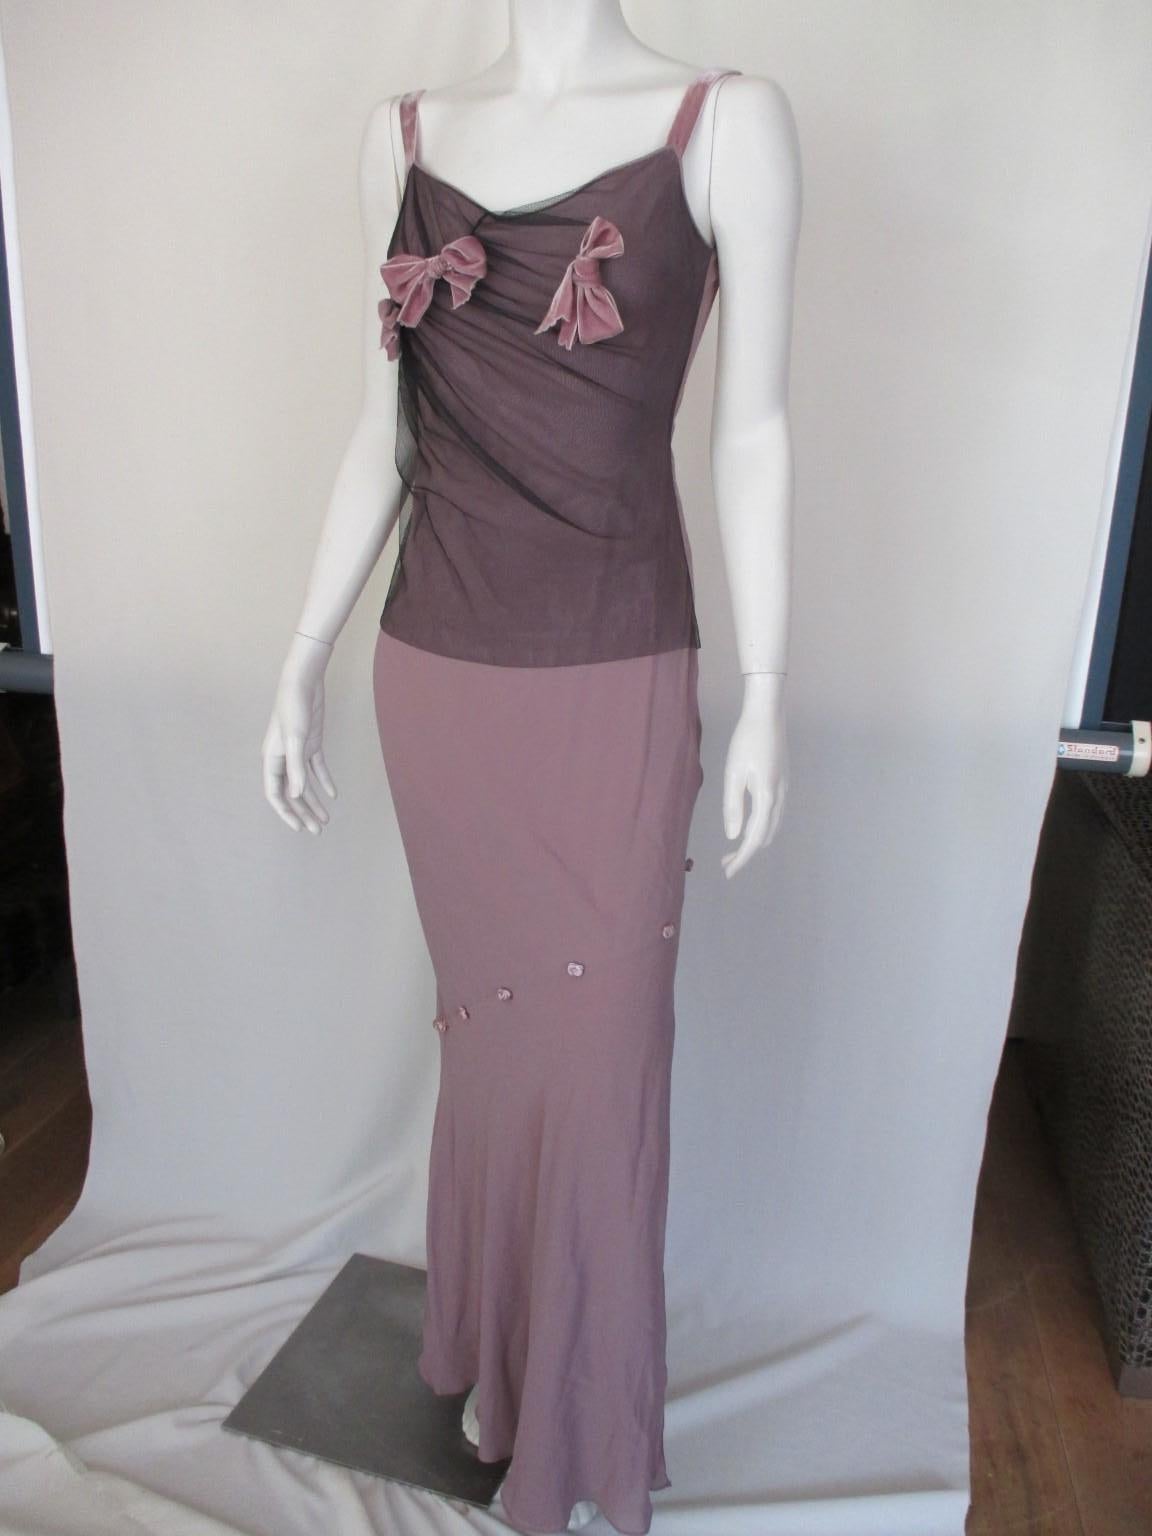 -Collectors item-
Vintage Rare 1990s JOHN GALLIANO PARIS dress with matching scarf.

We offer more exclusive fashion & fur items, view our frontstore.

Details:
Velvet bows and litle roses on dress
Scarf with litle roses
Side split 
Pre owned